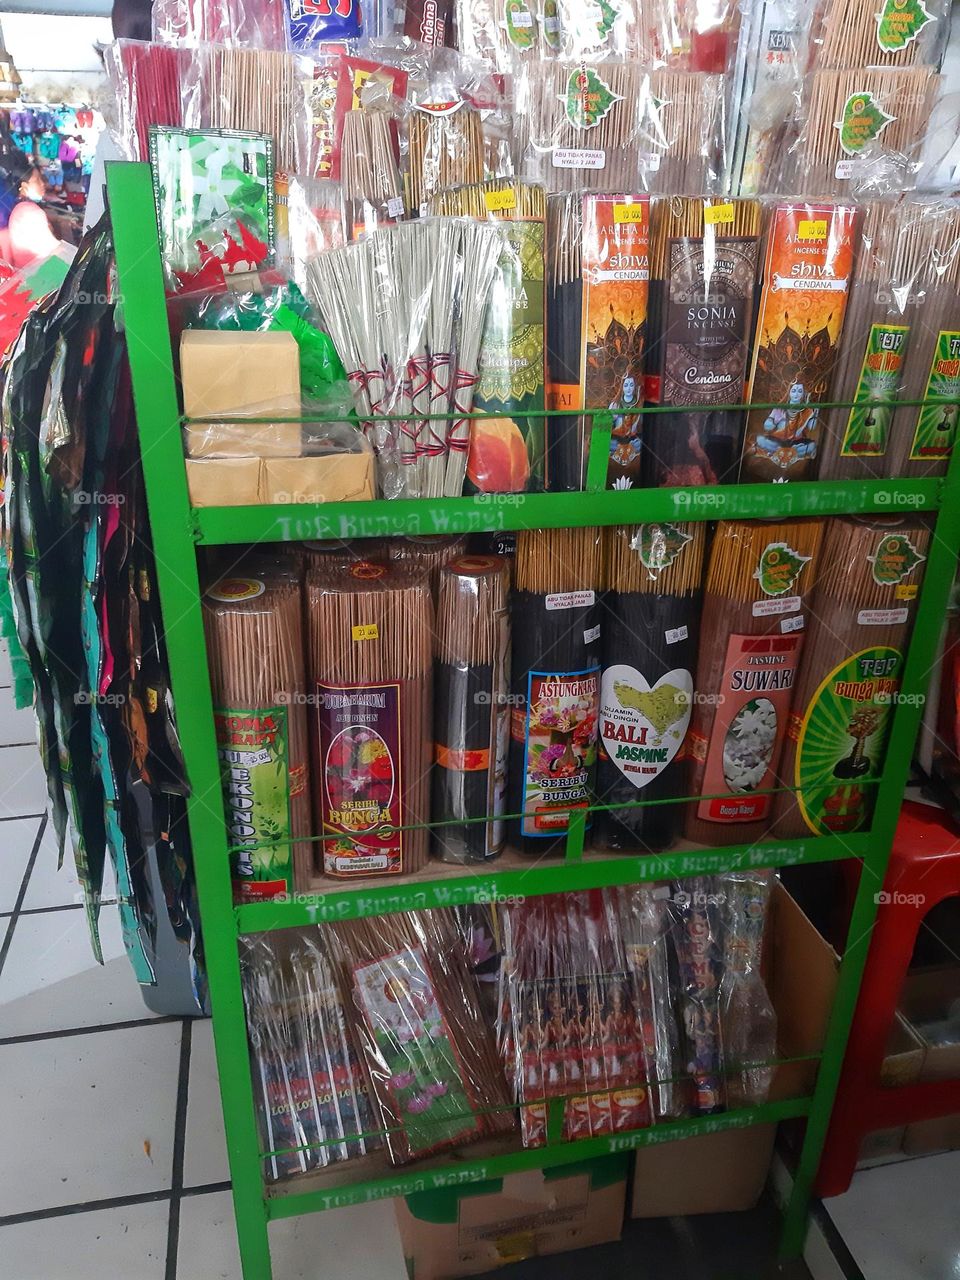 Many local balinese lightsticks placed on the shelf